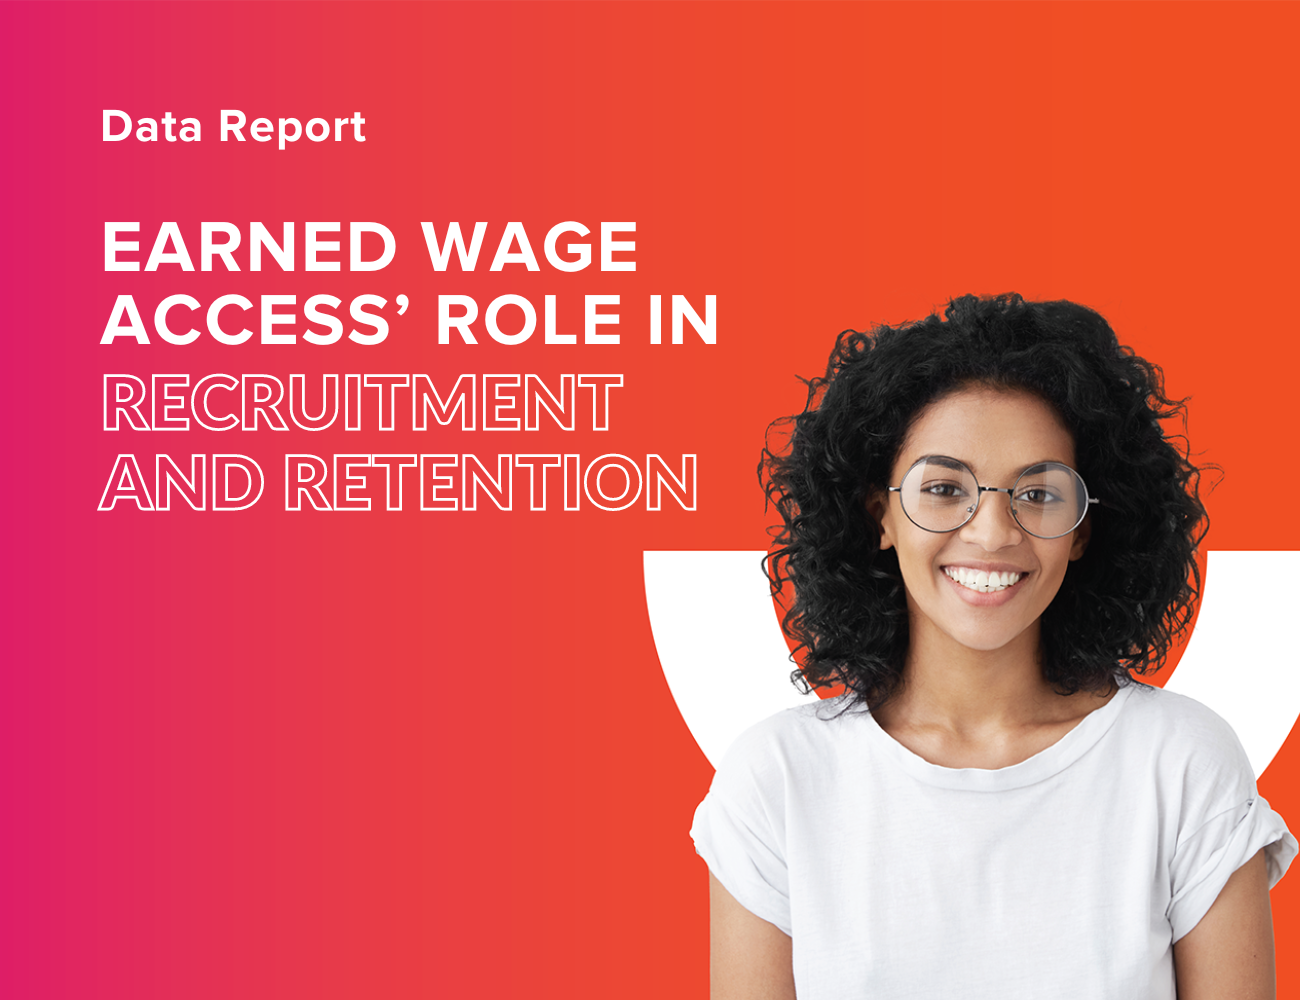 Earned Wage Access’ Role in Recruitment and Retention